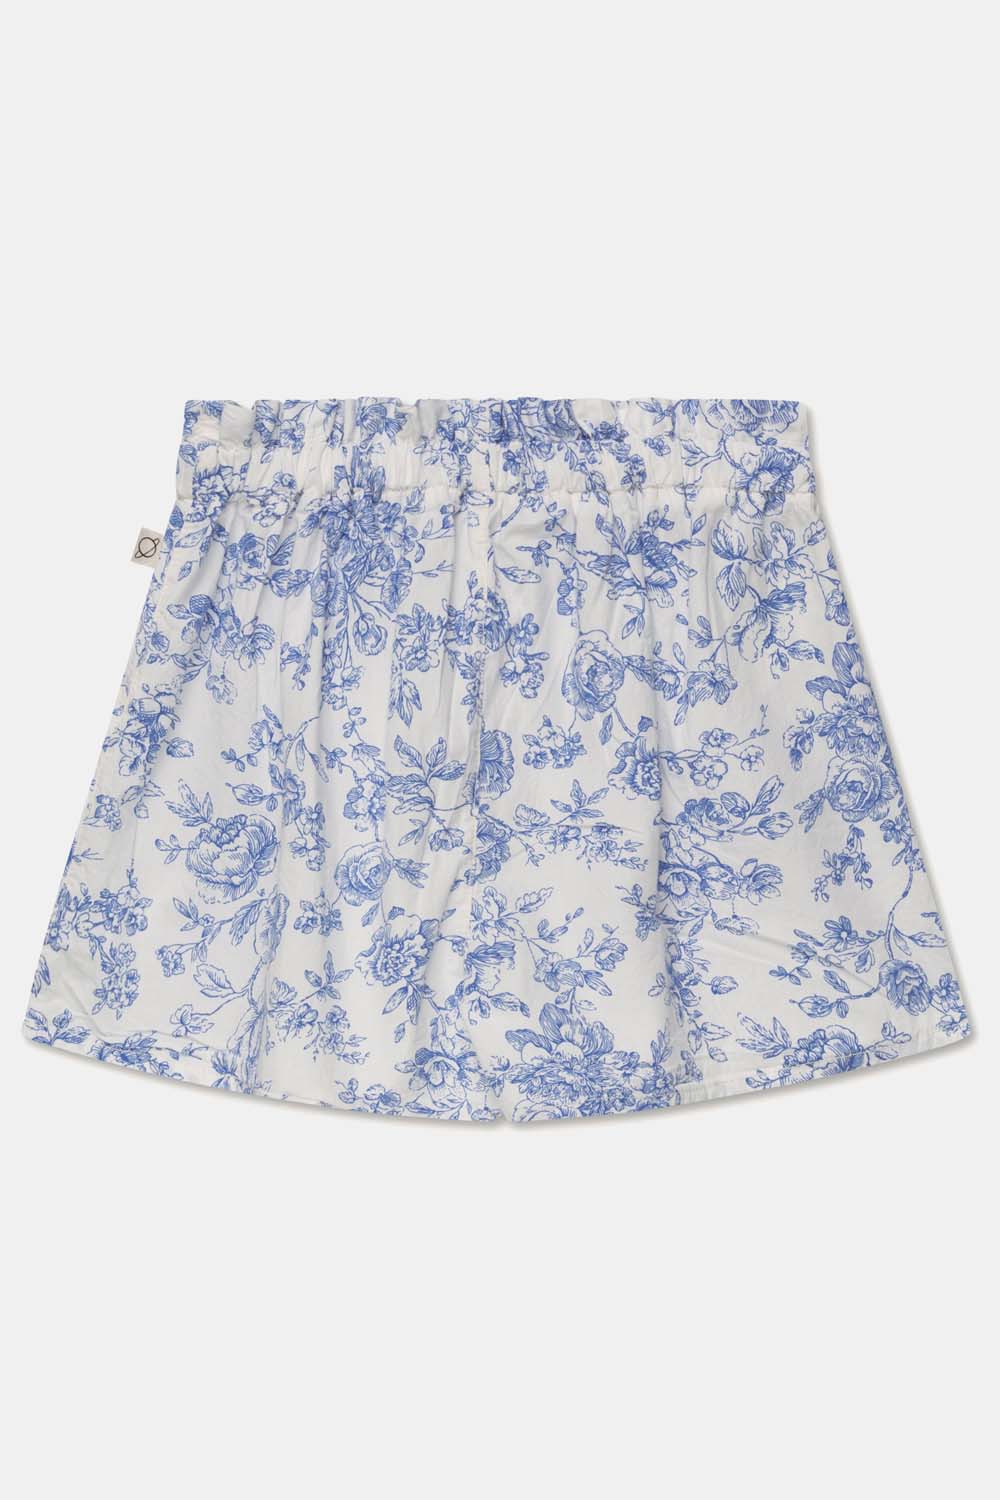 My Little Cozmo Girls Floral Shorts